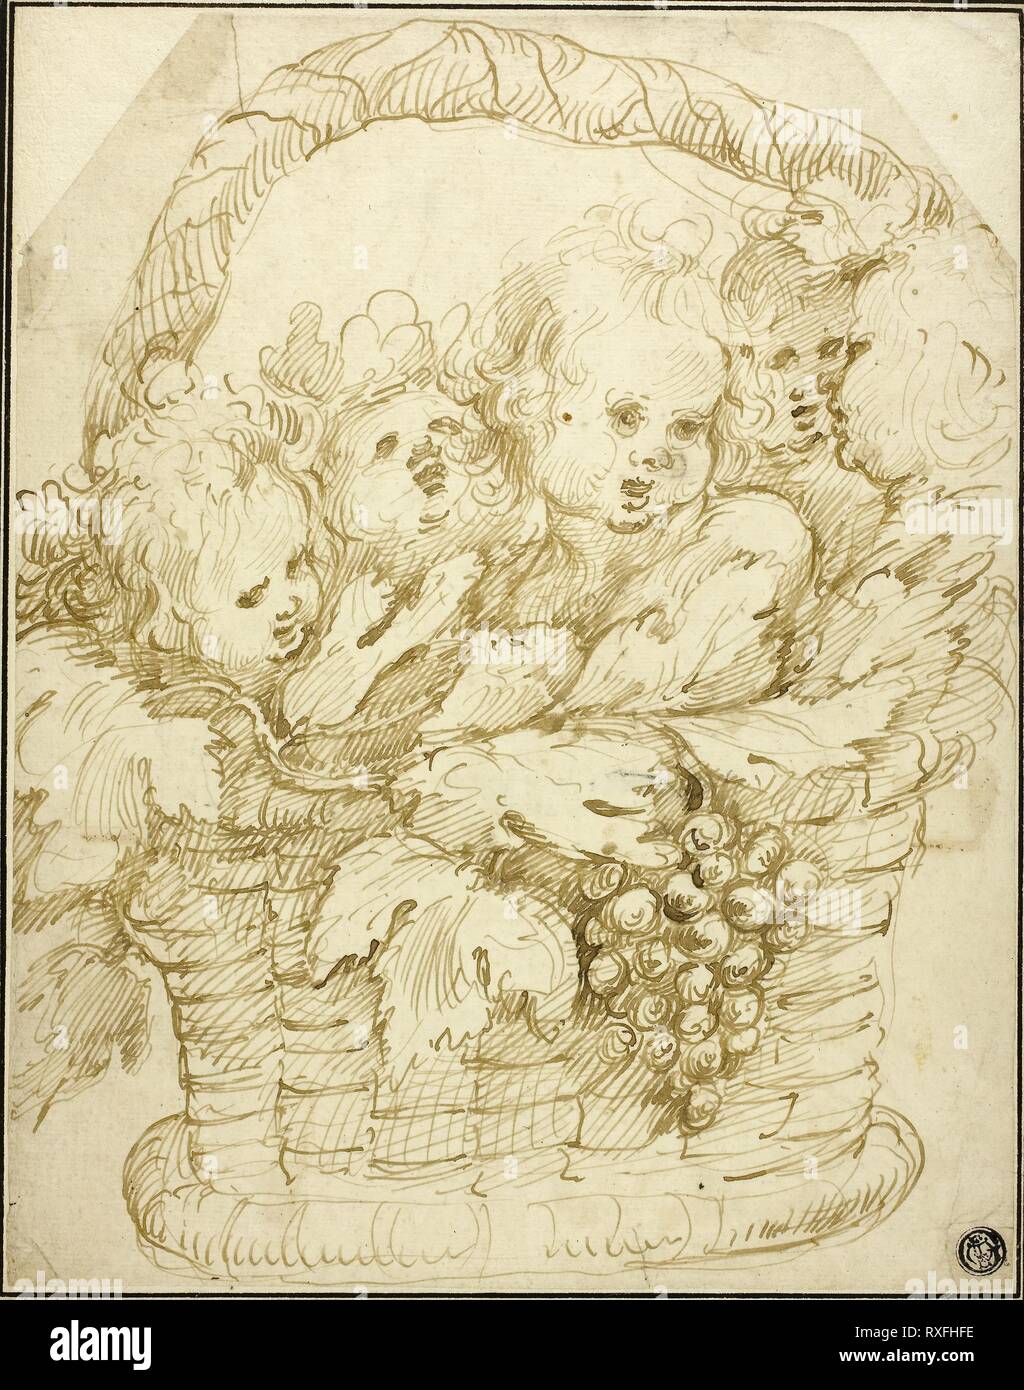 Basket of Cupids. Attributed to Jan Boeckhorst; Flemish, born Germany, about 1604-1668. Date: 1625-1668. Dimensions: 269 × 213 mm (sheet); 310 × 251 (secondary support). Pen and brown ink on ivory laid paper, laid down on ivory laid paper (chine collé). Origin: Flanders. Museum: The Chicago Art Institute. Author: Johann Boeckhorst. Stock Photo